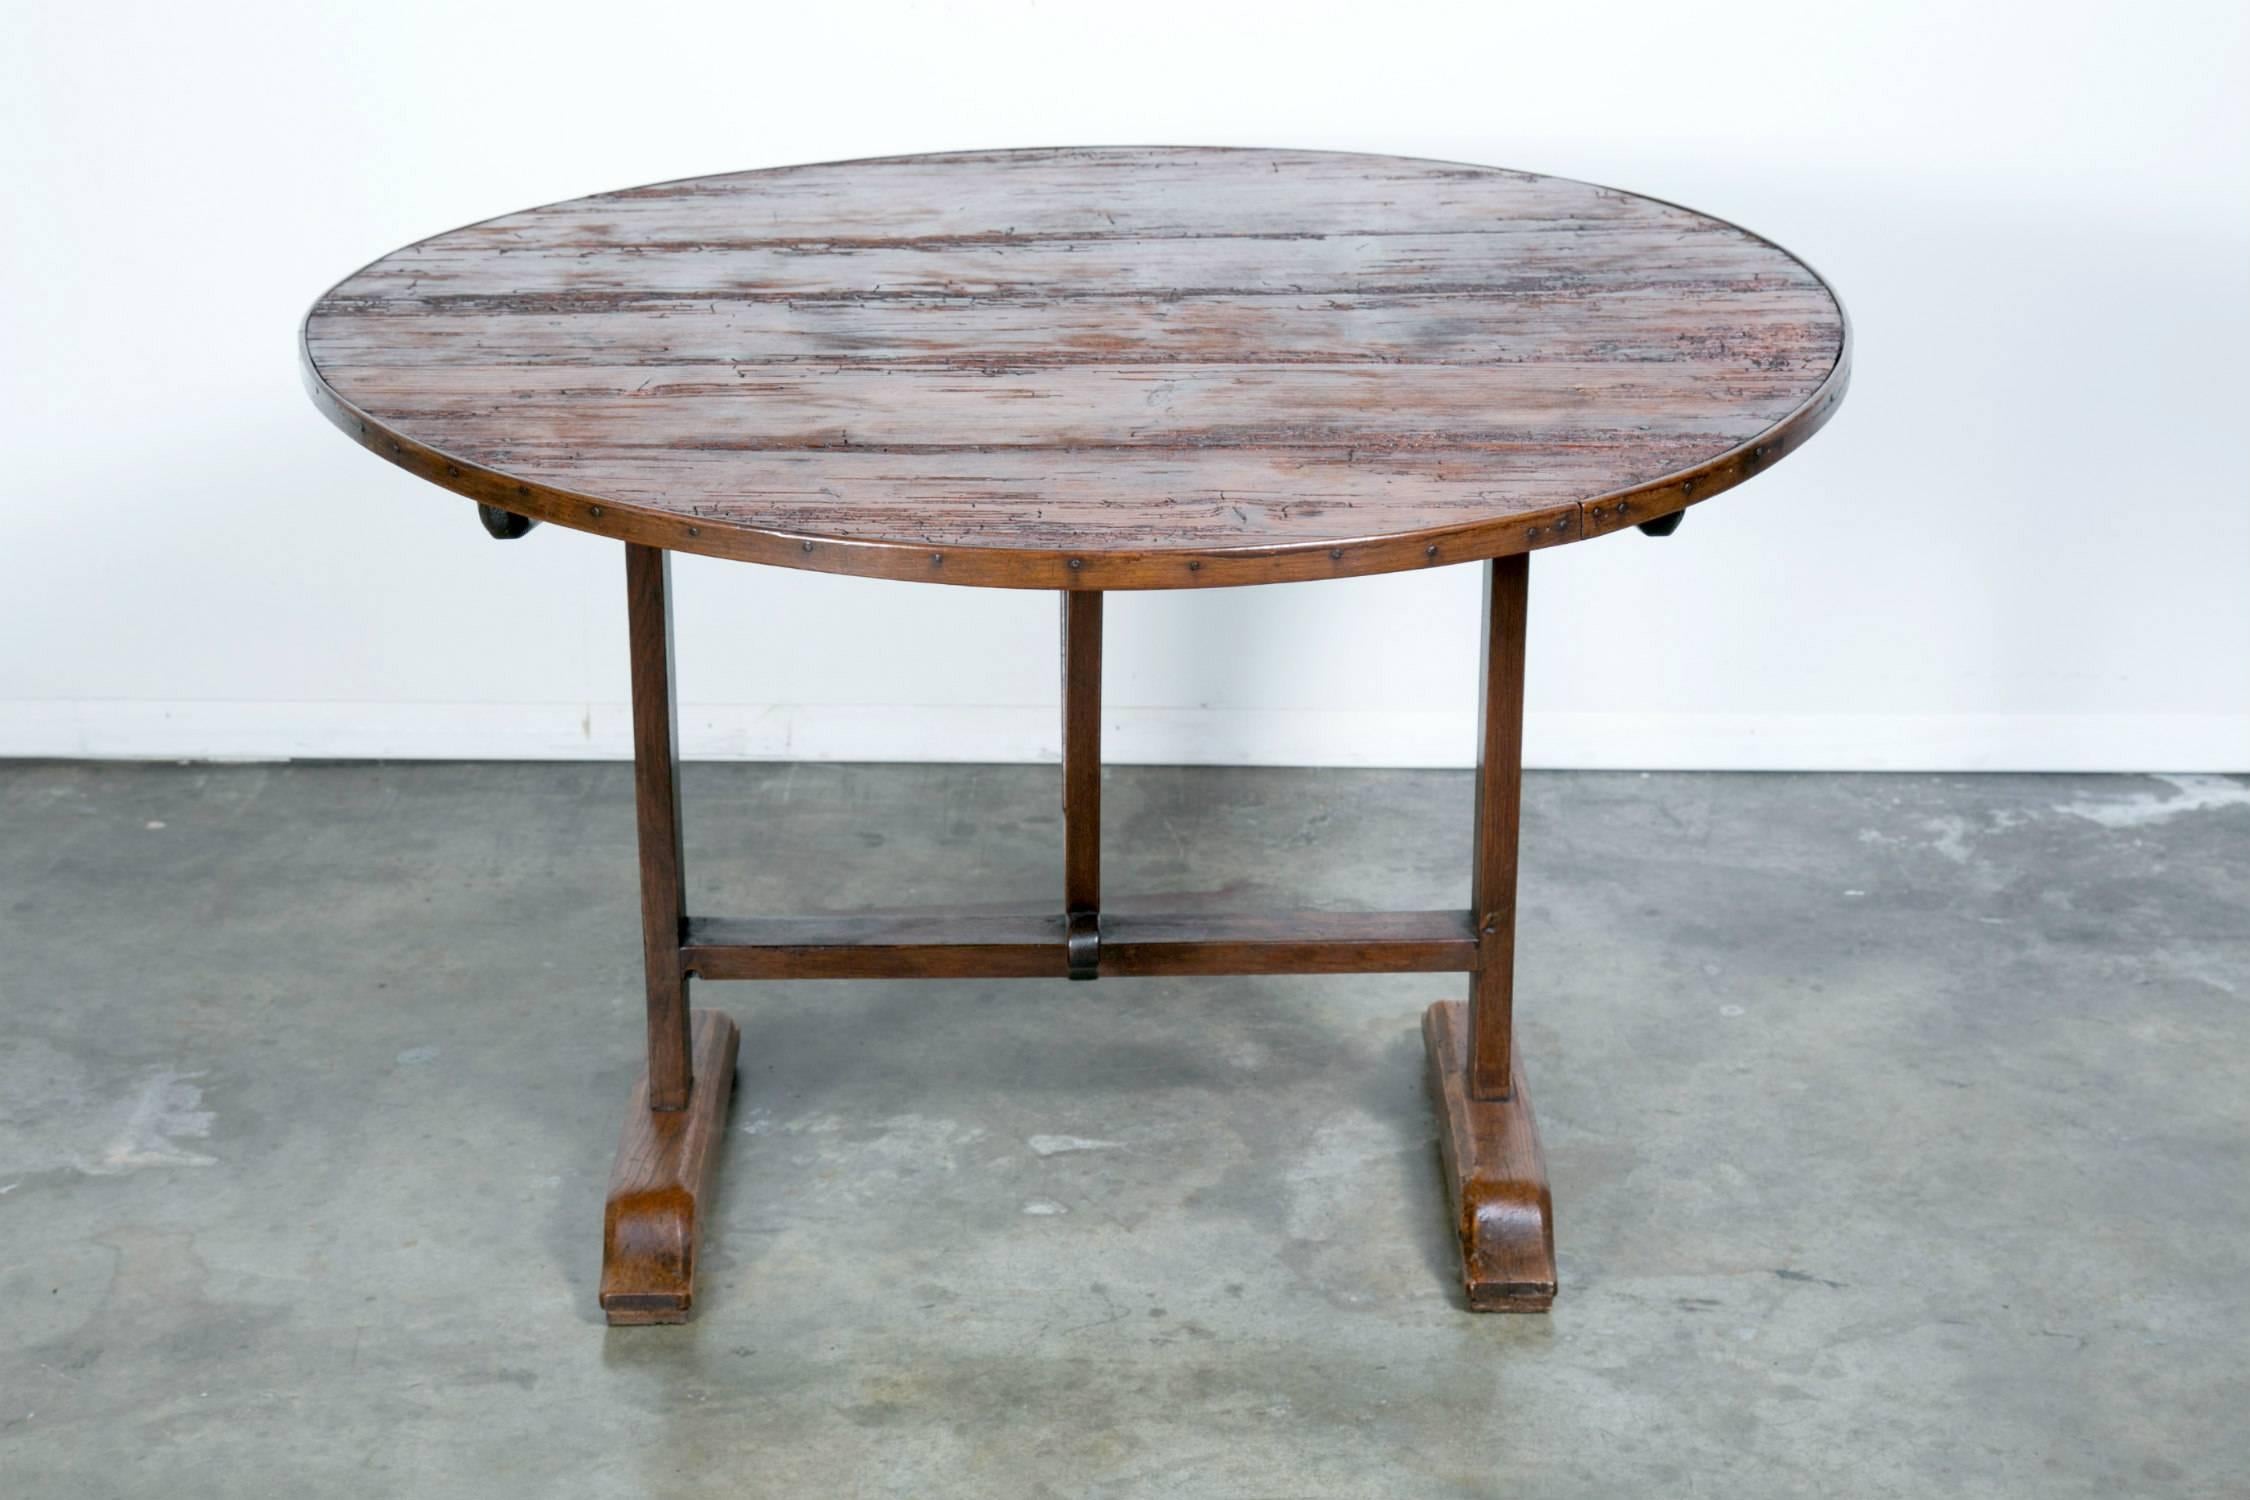 Rustic French wine table with typical tilt-top that allows the table to stand against the wall when not in use. Dating back to the mid-1800s, this superbly crafted vendange table features a round, plank top in pine and a chestnut base with wooden